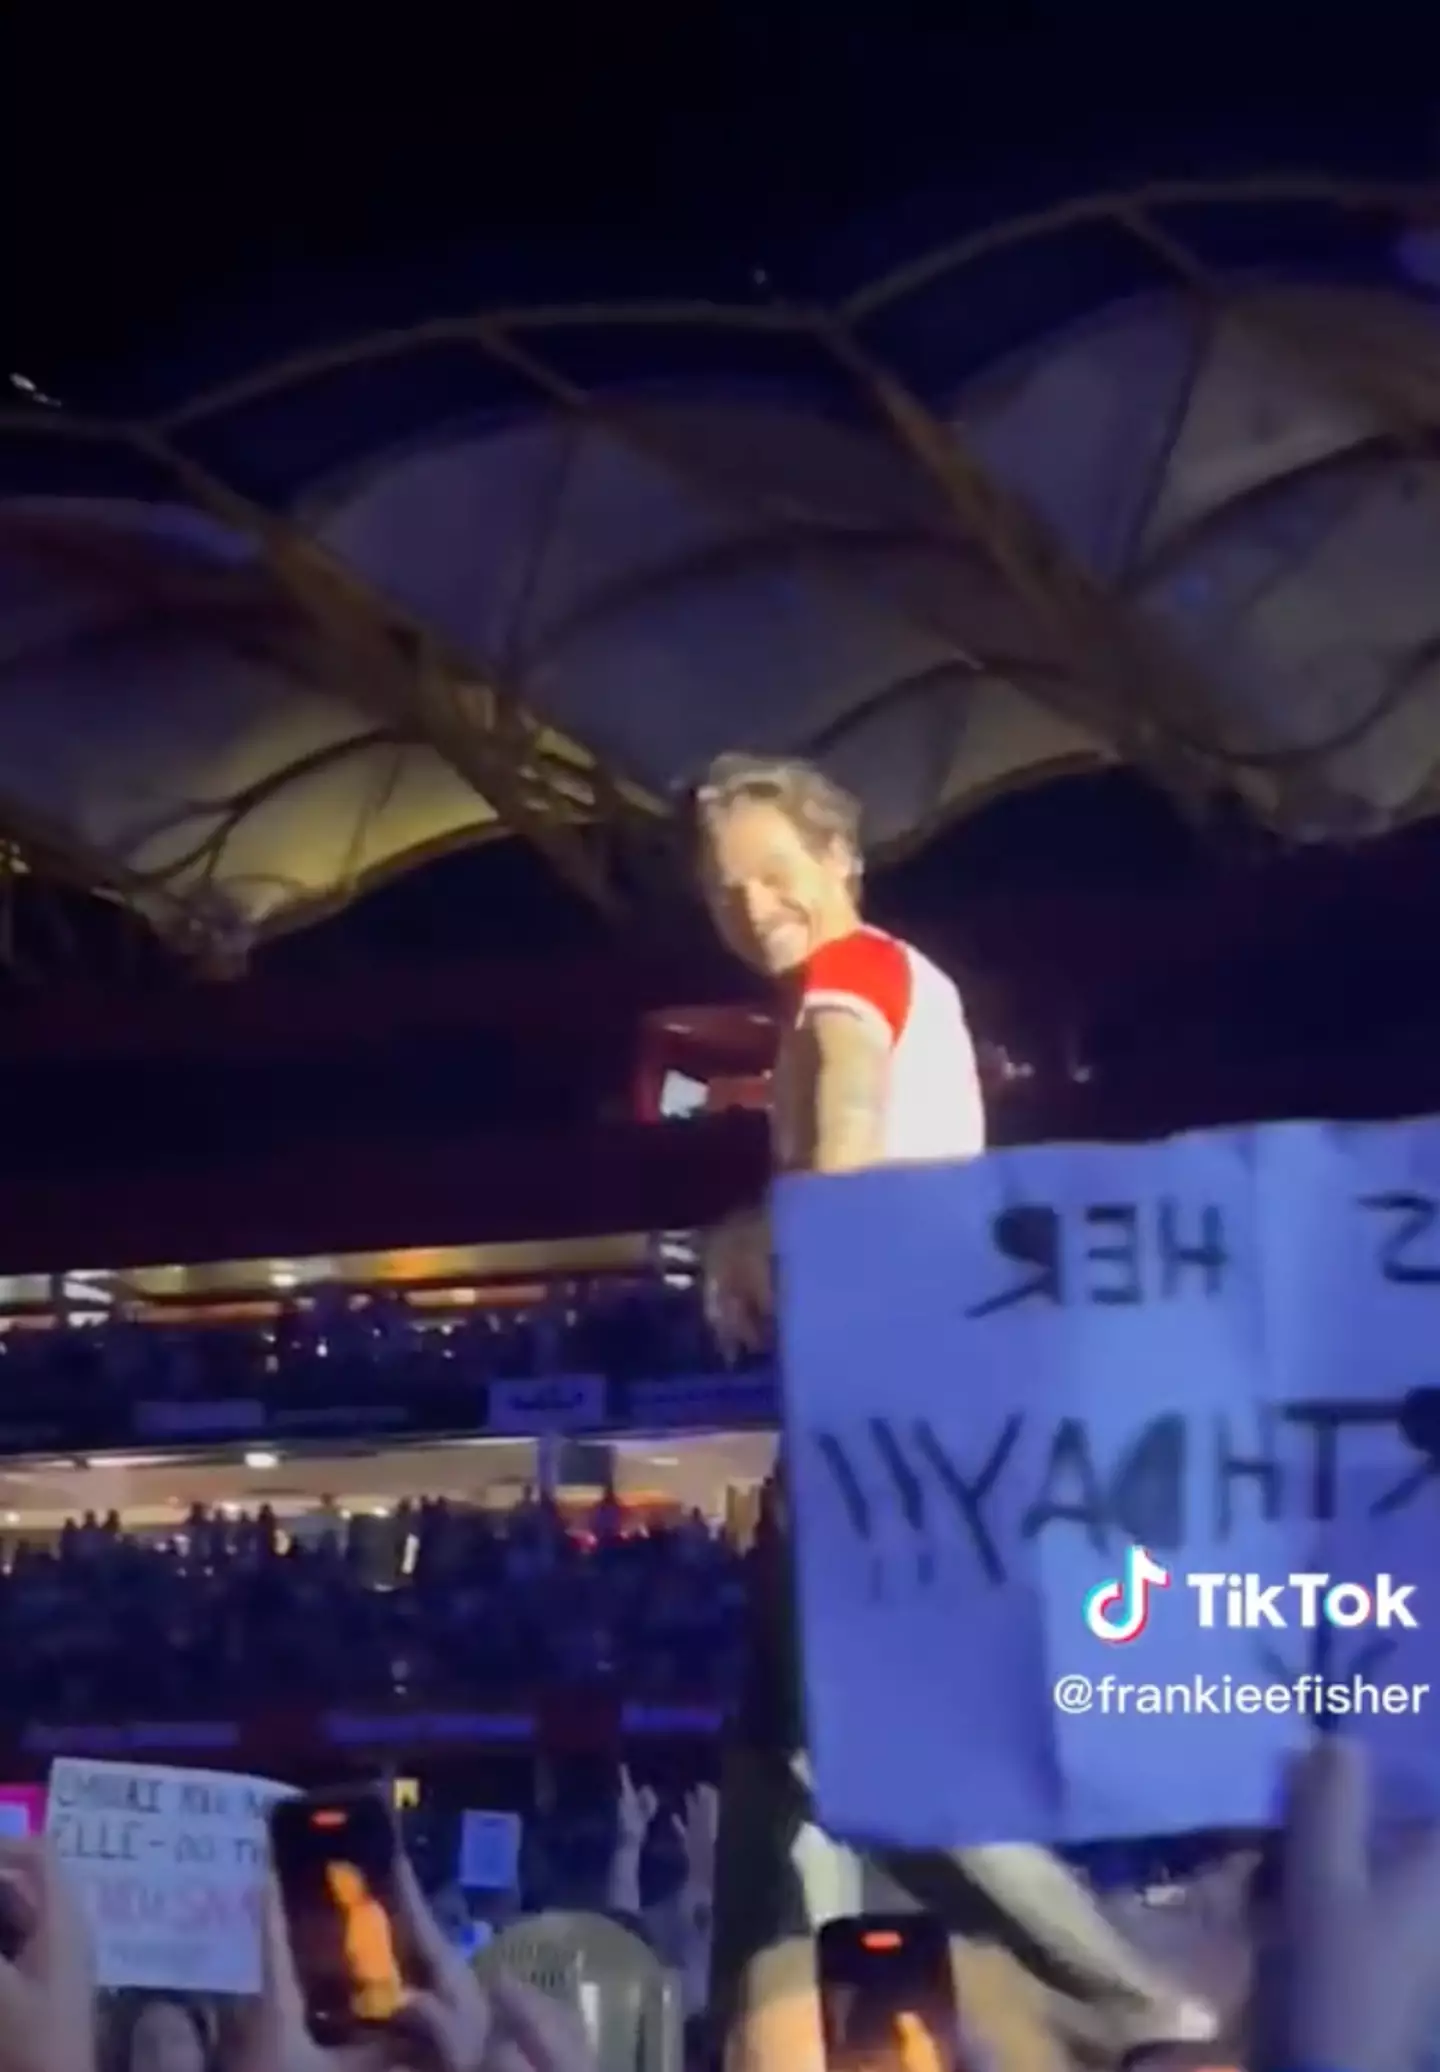 Harry found the sign funny as he made his way down the stage at the Australian concert.